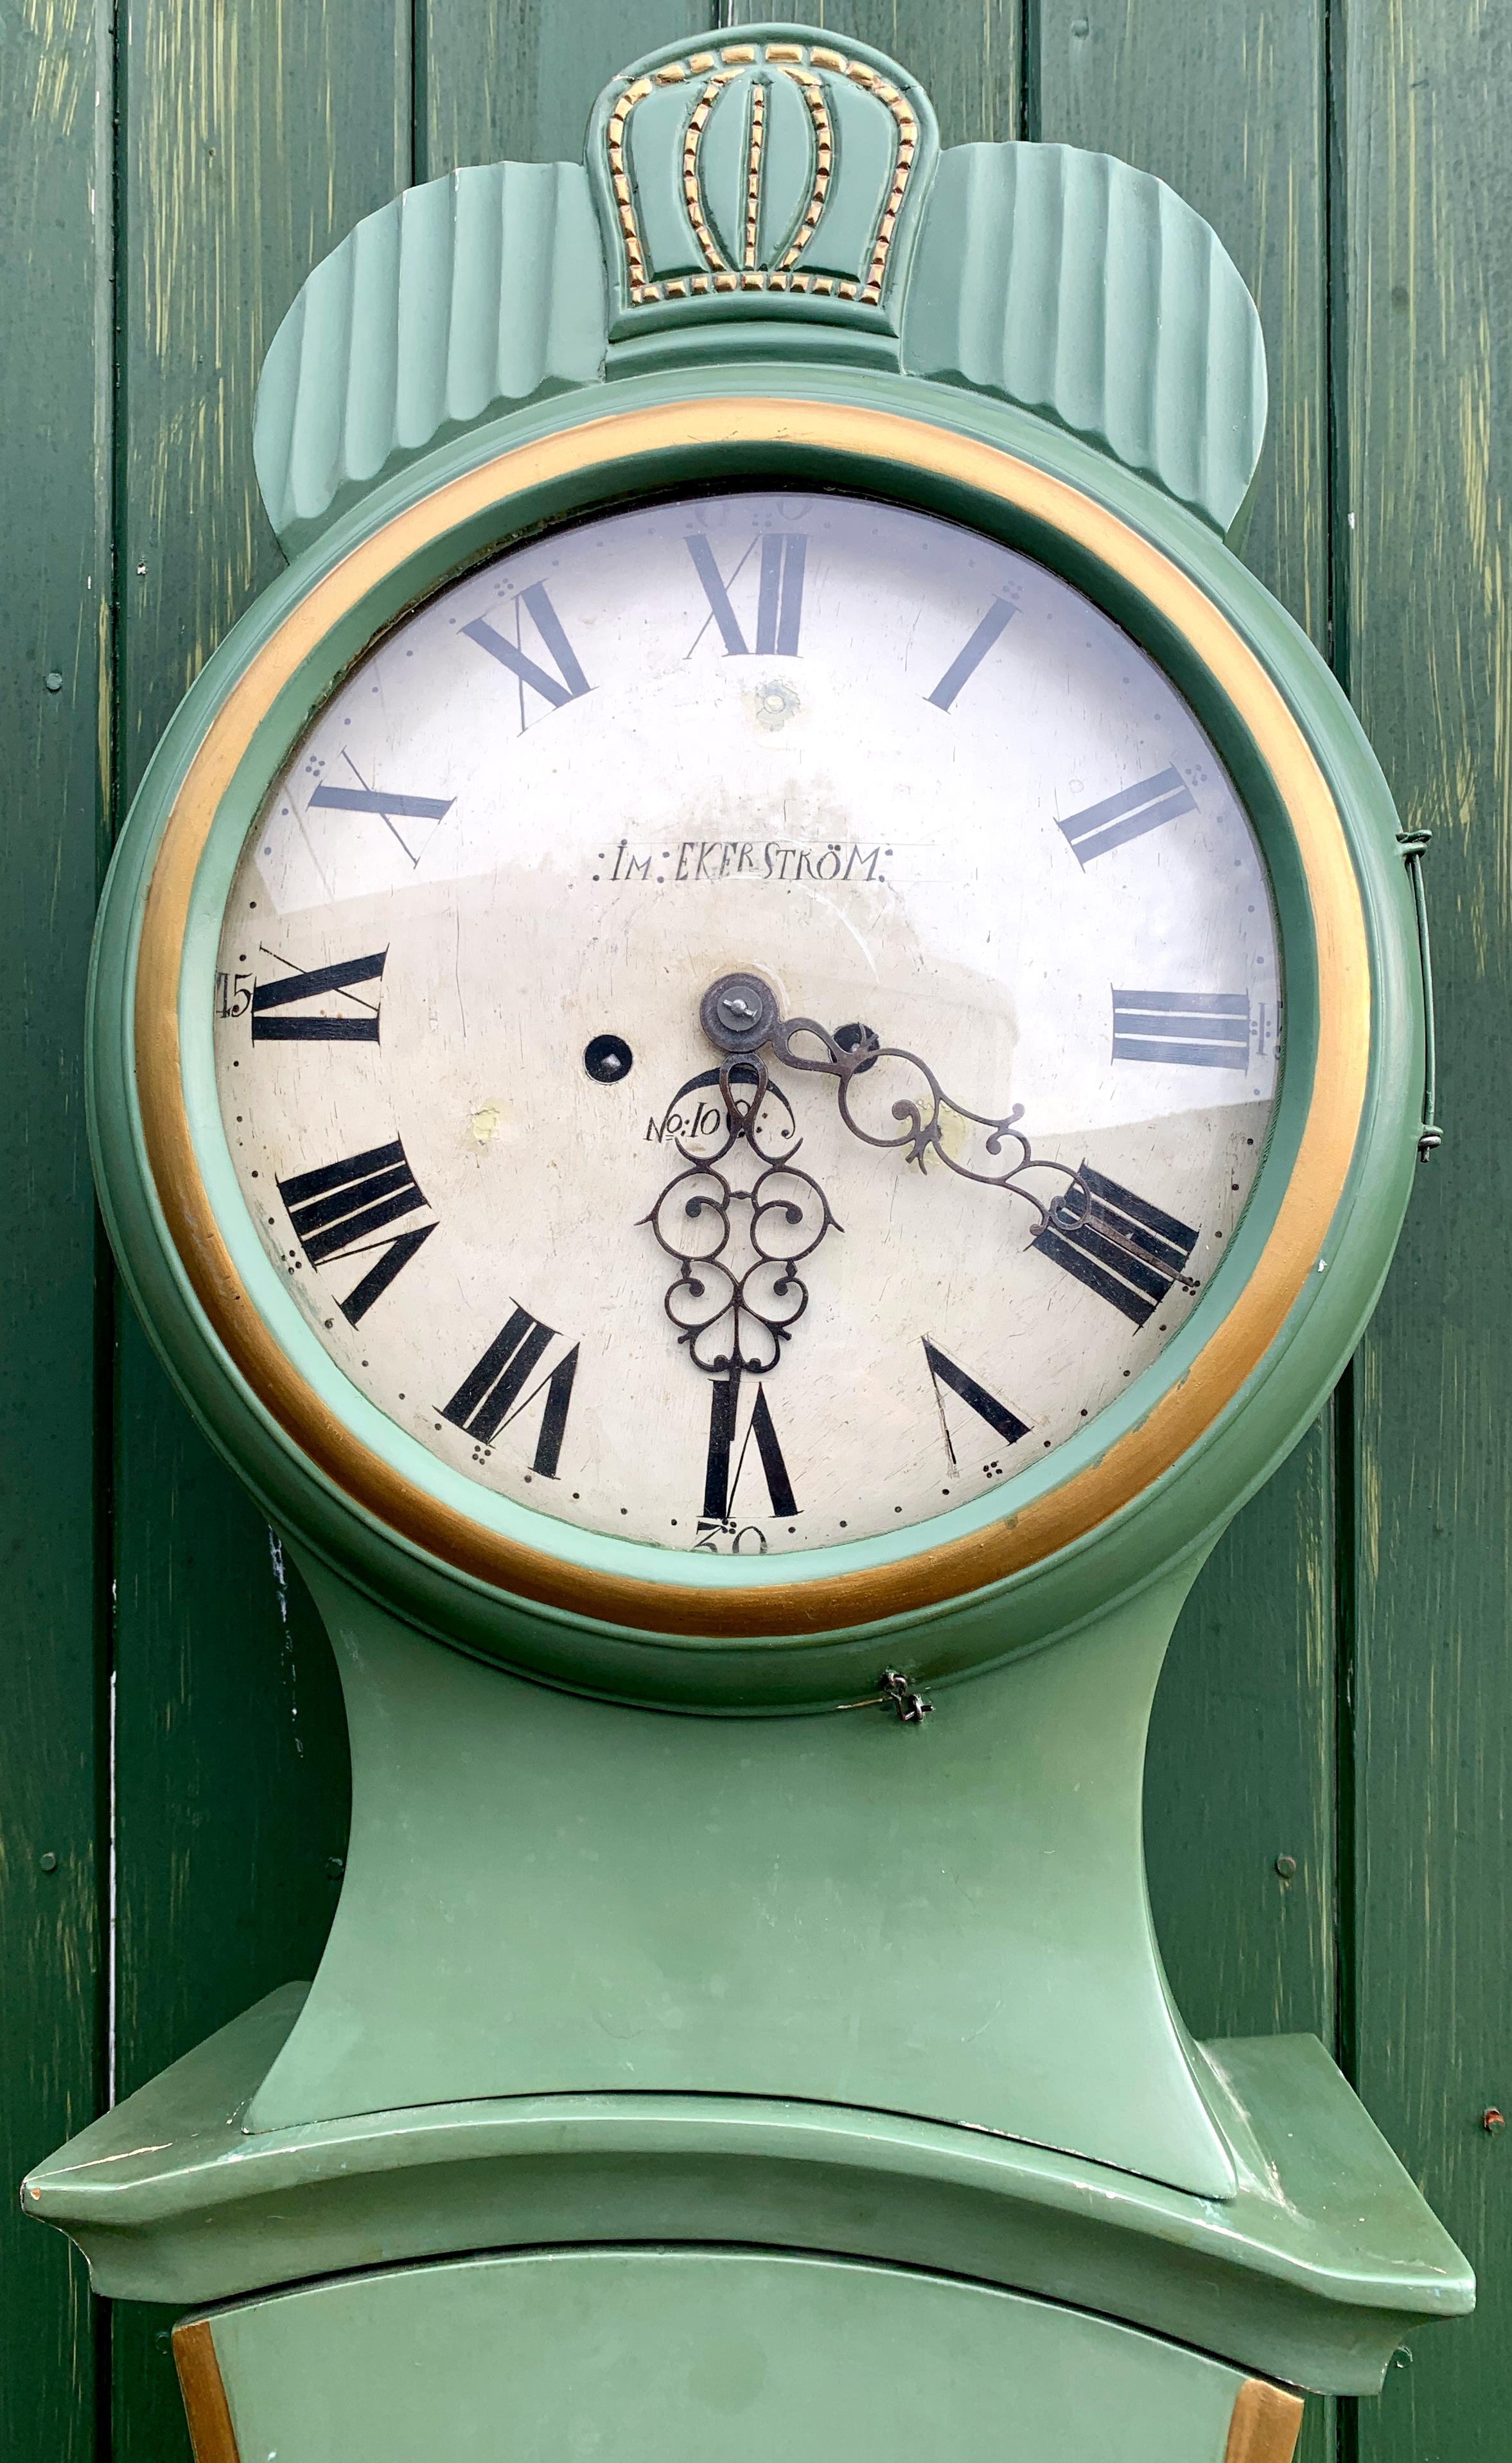 Antique Swedish mora clock from the early 1800s in lovely Green and Gold finish and Classic Fryksdall detailing with an extended belly shape body, Dual Star Motif and a clean face in good condition with makers name Ekerstrom. Measures: 200 cm.

It